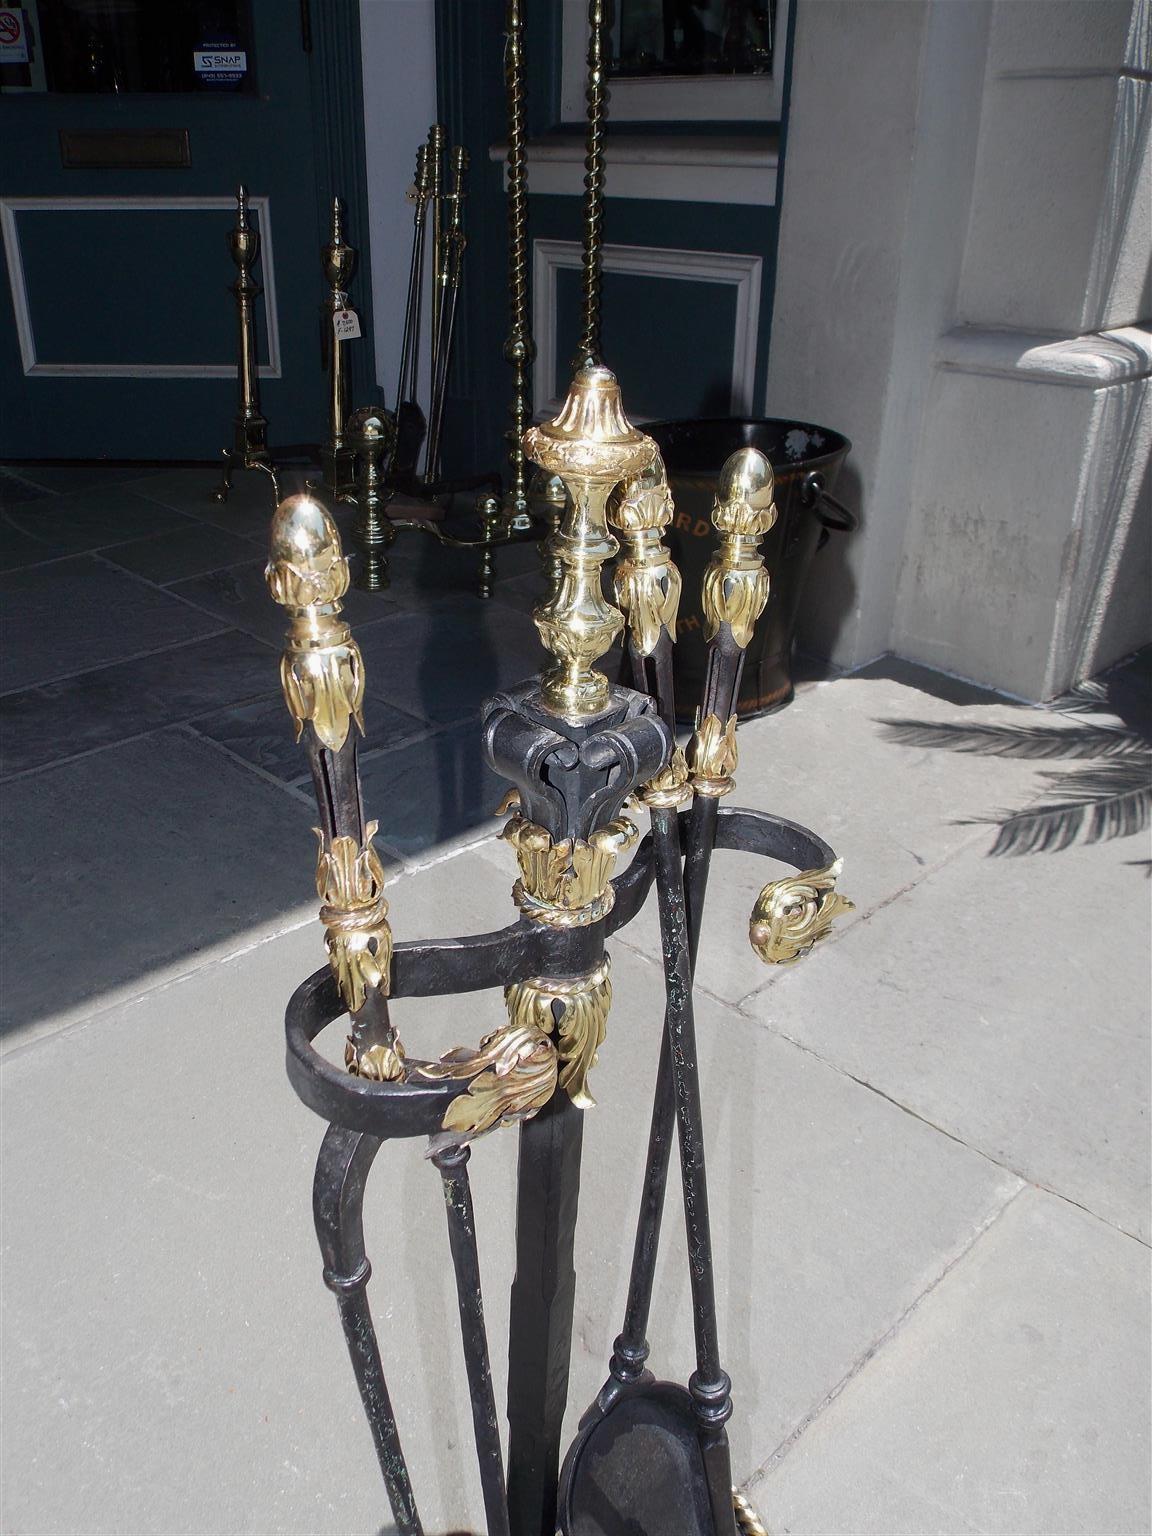 Mid-19th Century French Brass & Cast Iron Decorative Floral Fire Tools on Demilune Stand, C. 1840 For Sale